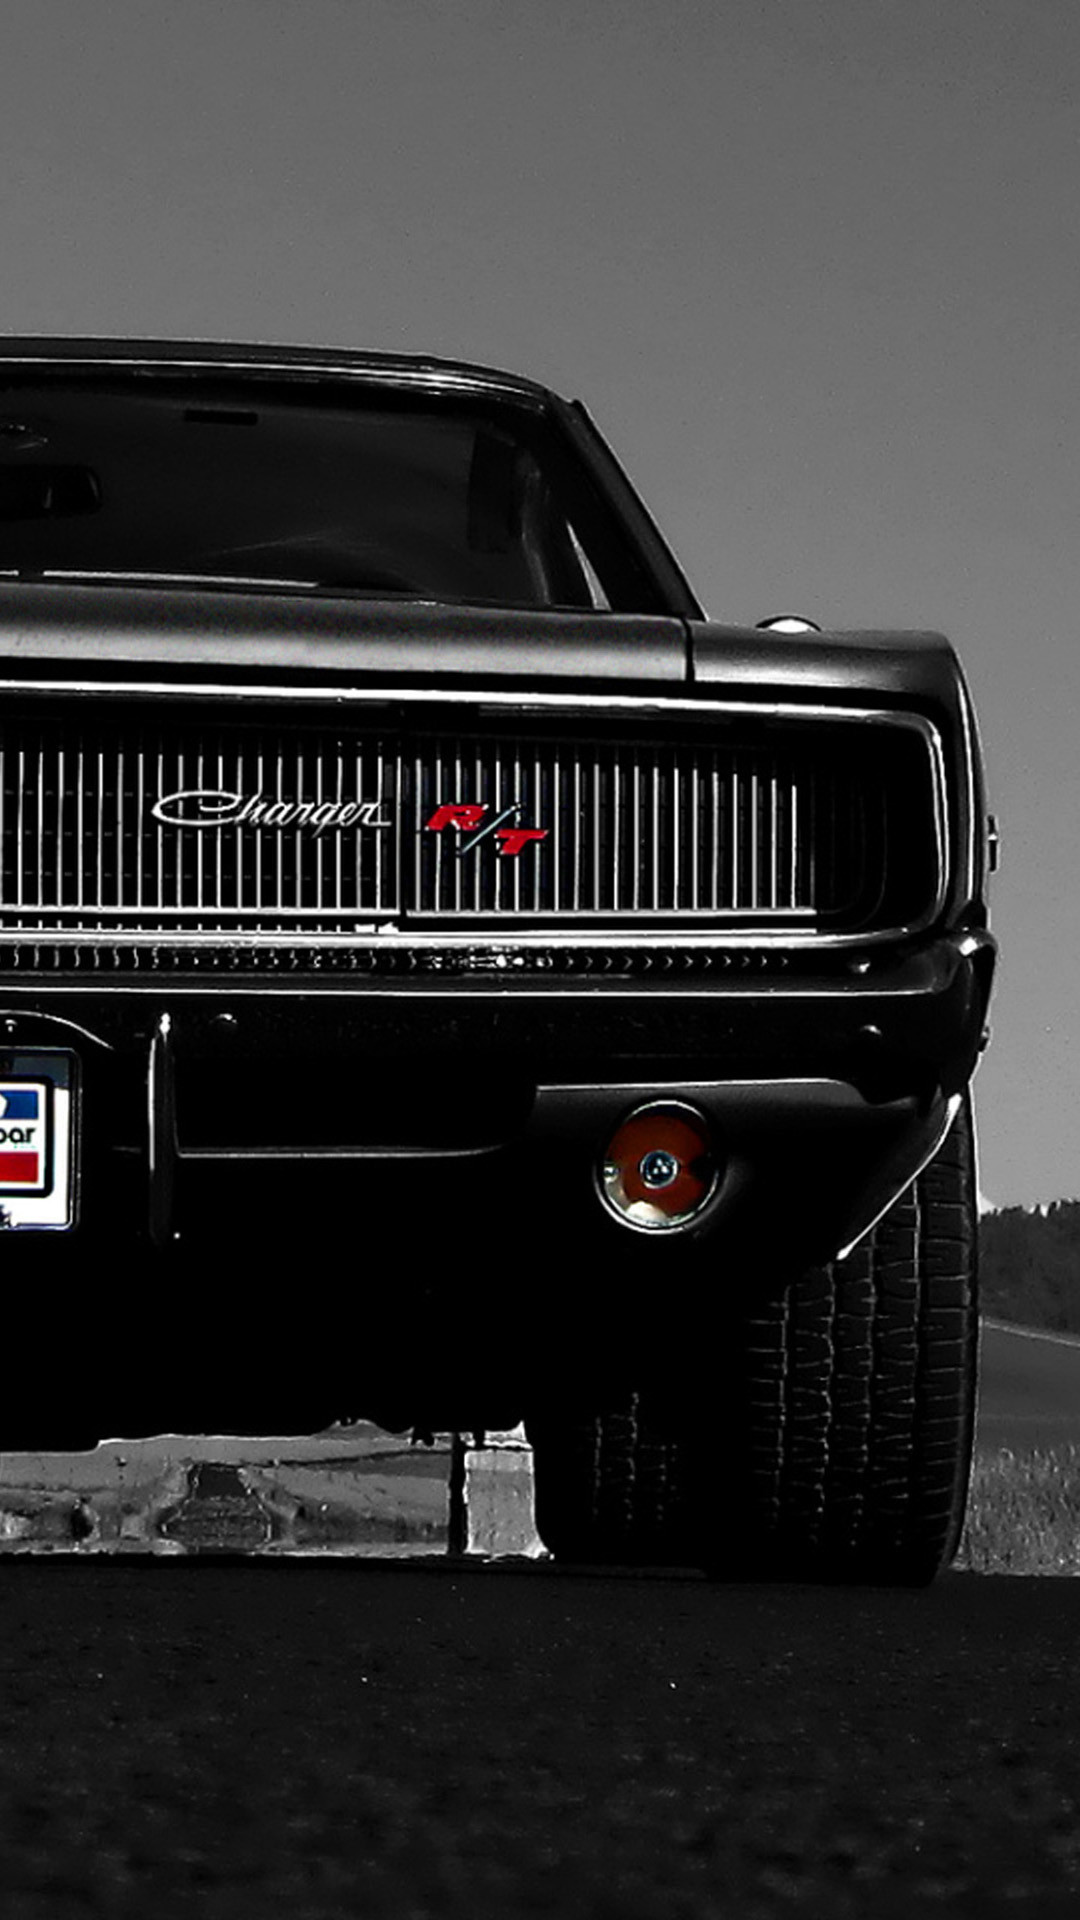 Dodge Charger wallpapers